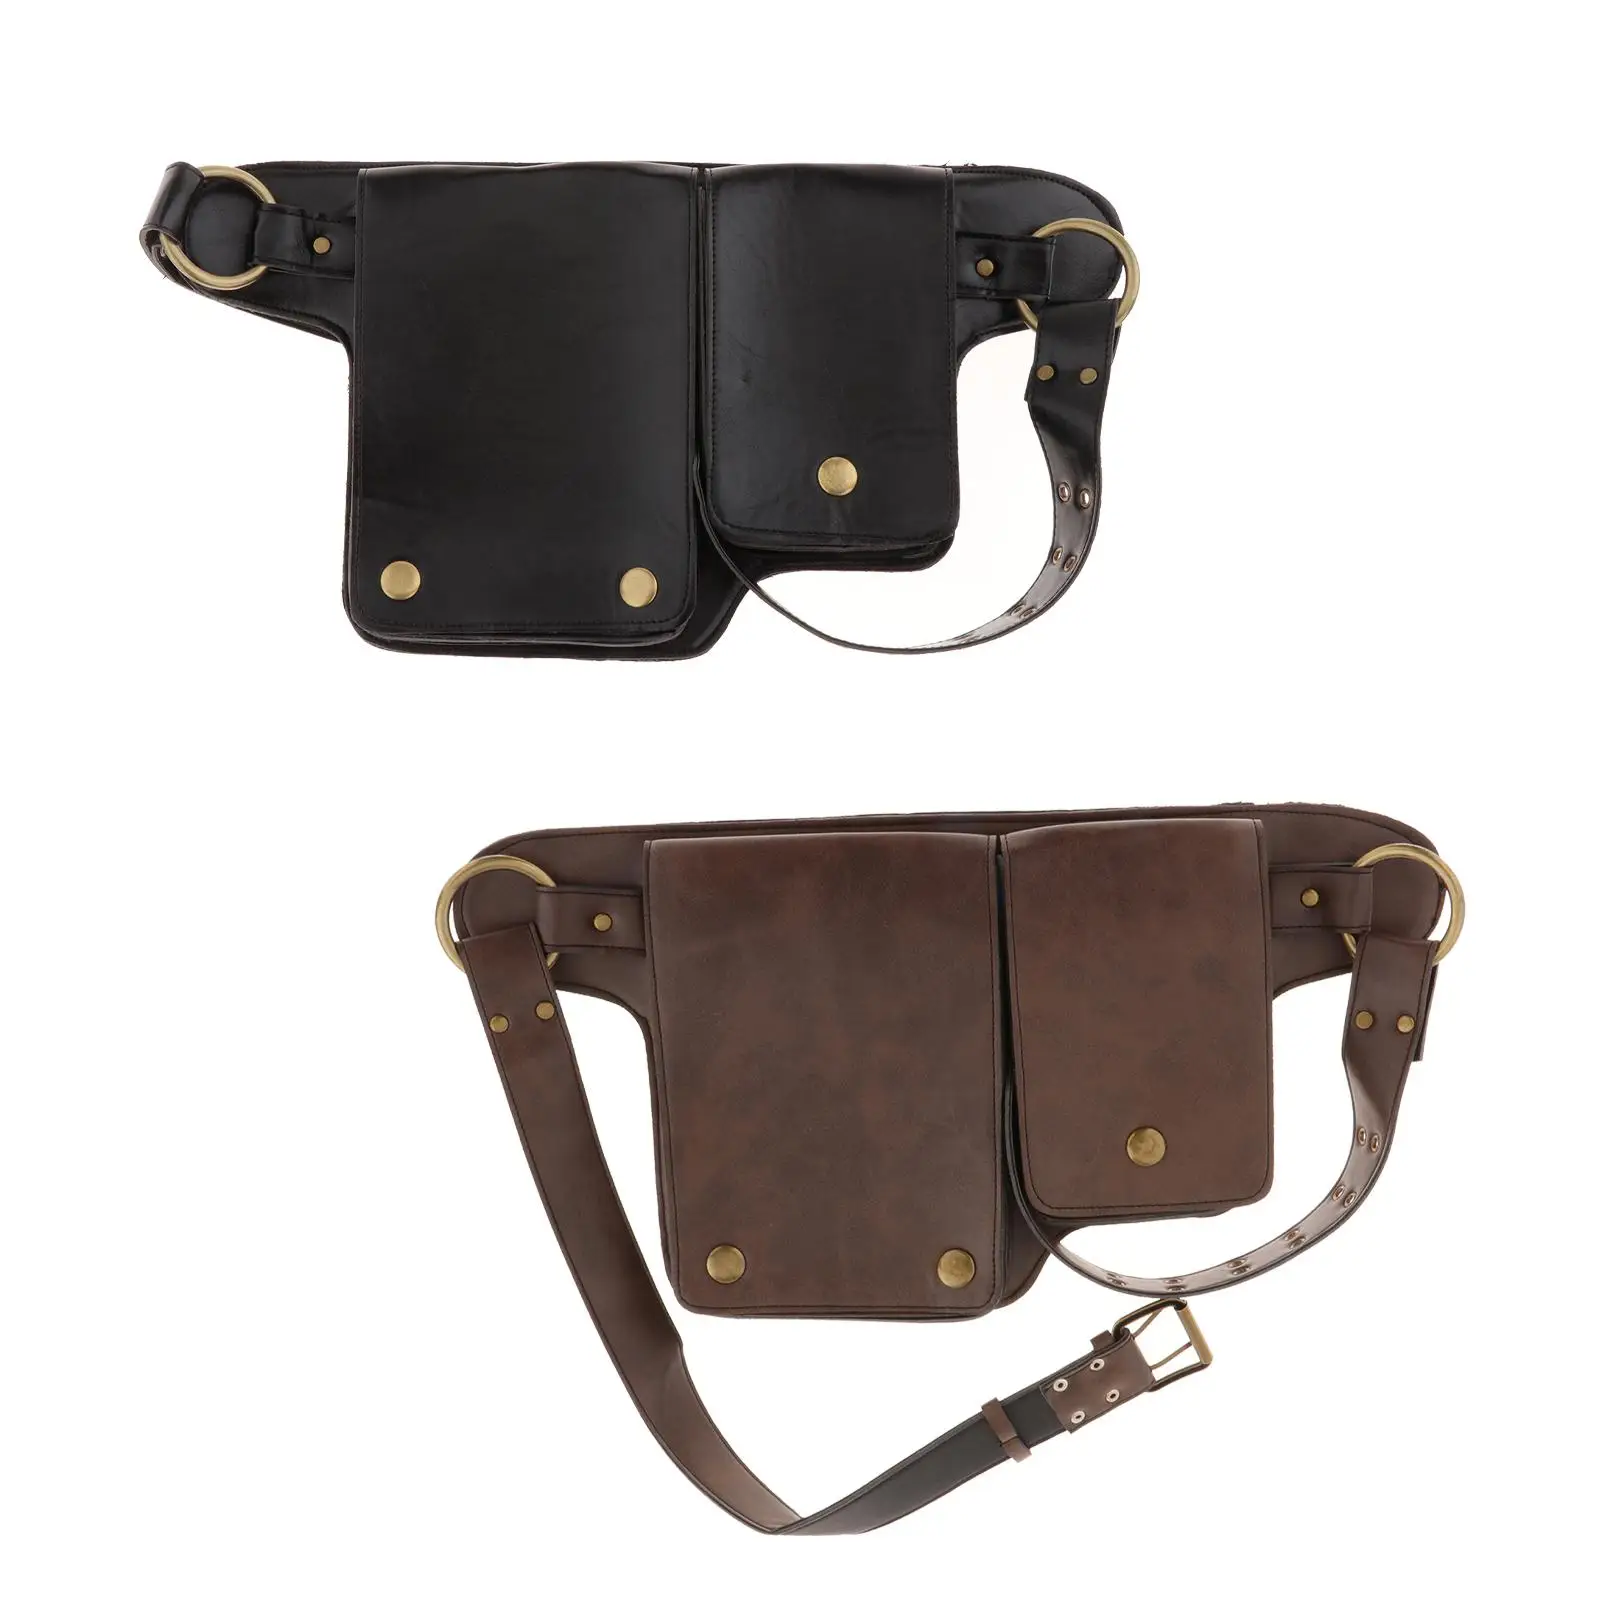 PU Leather Waist Belt Pouch Fannypack Purse Vintage Style Medieval Waist Pocket Fanny Pack for Roleplaying Cosplay